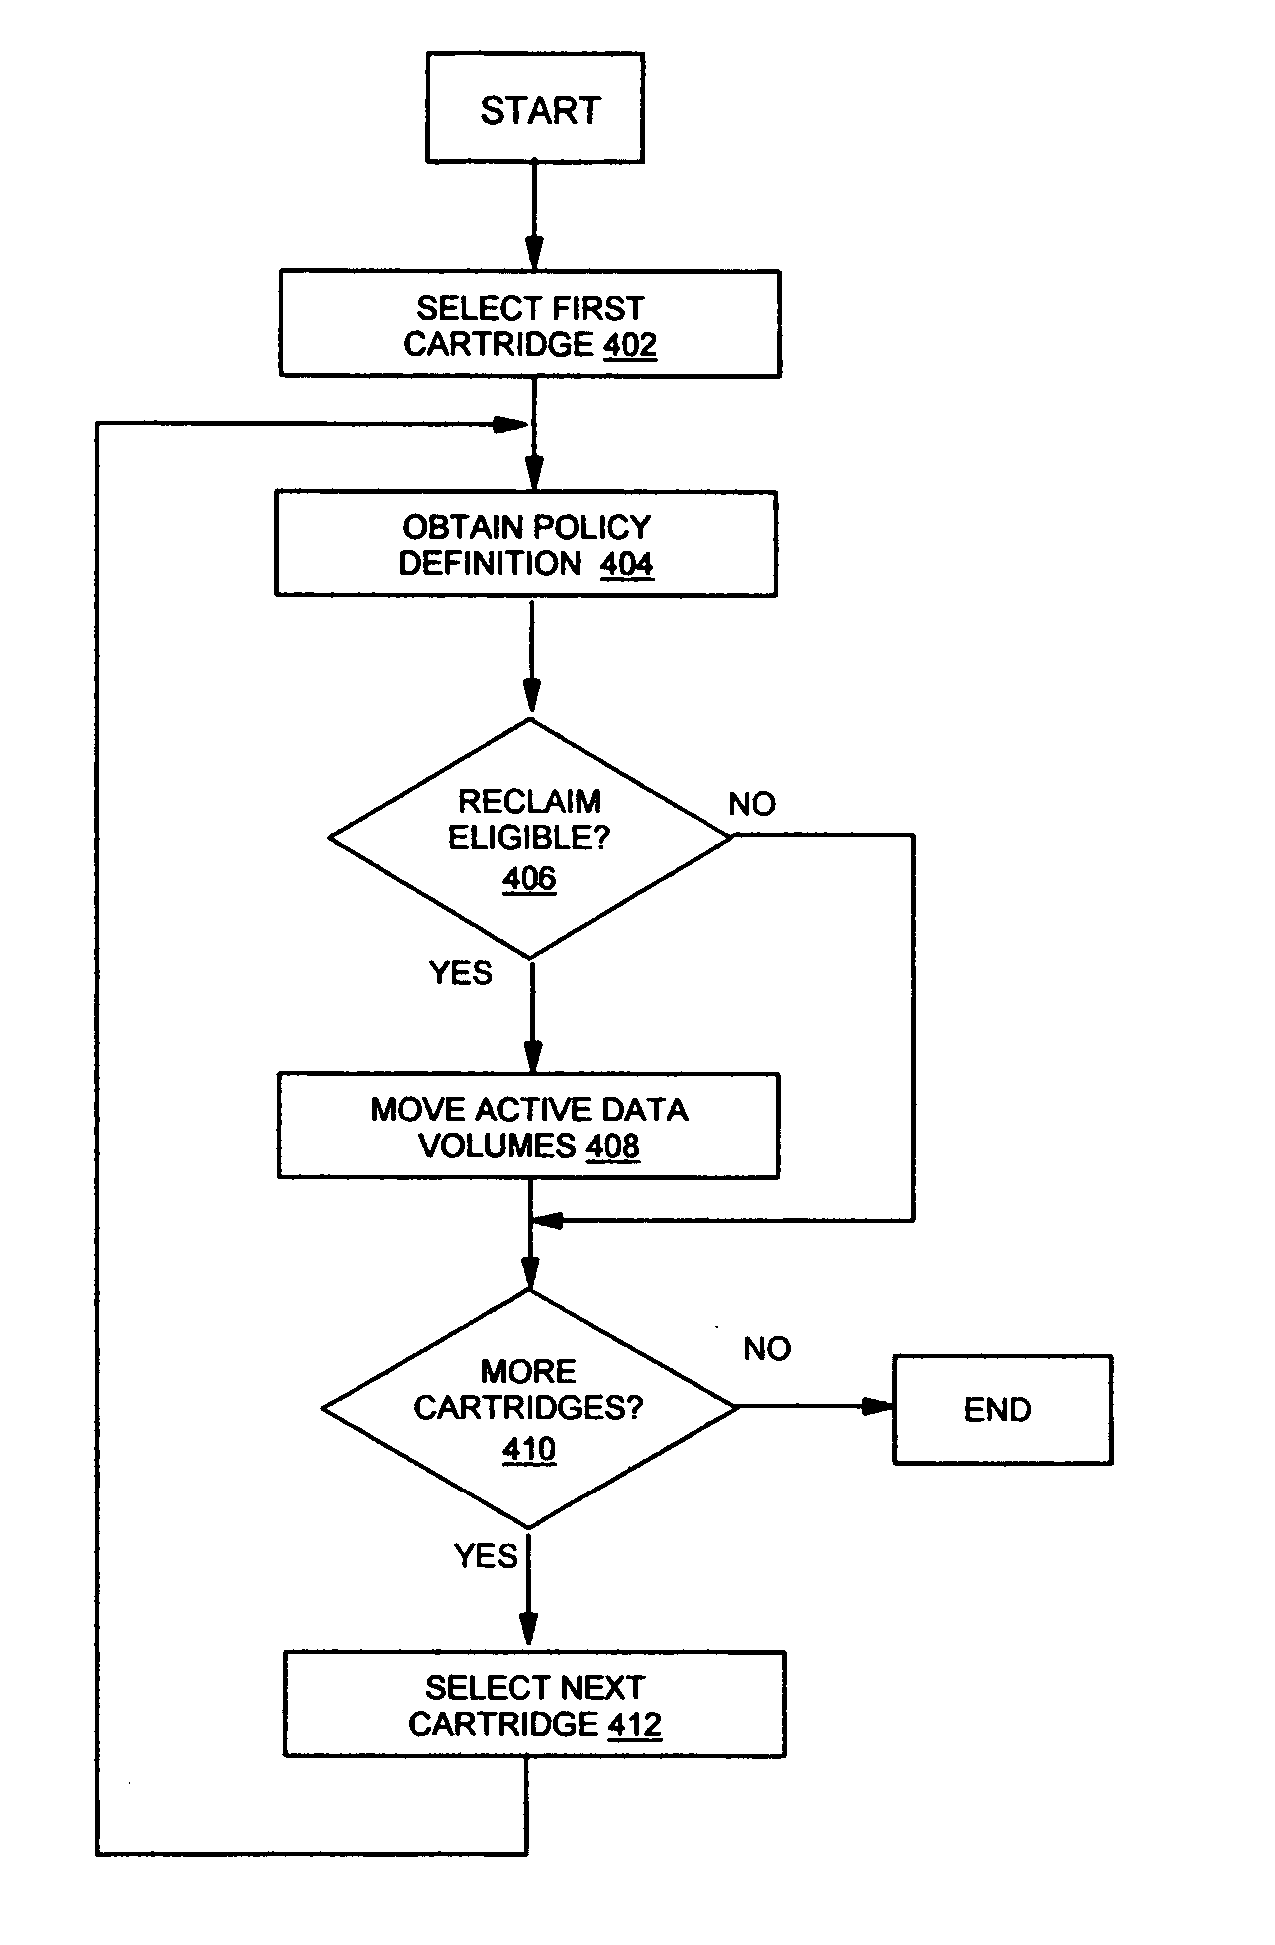 Policy based data migration in a hierarchical data storage system